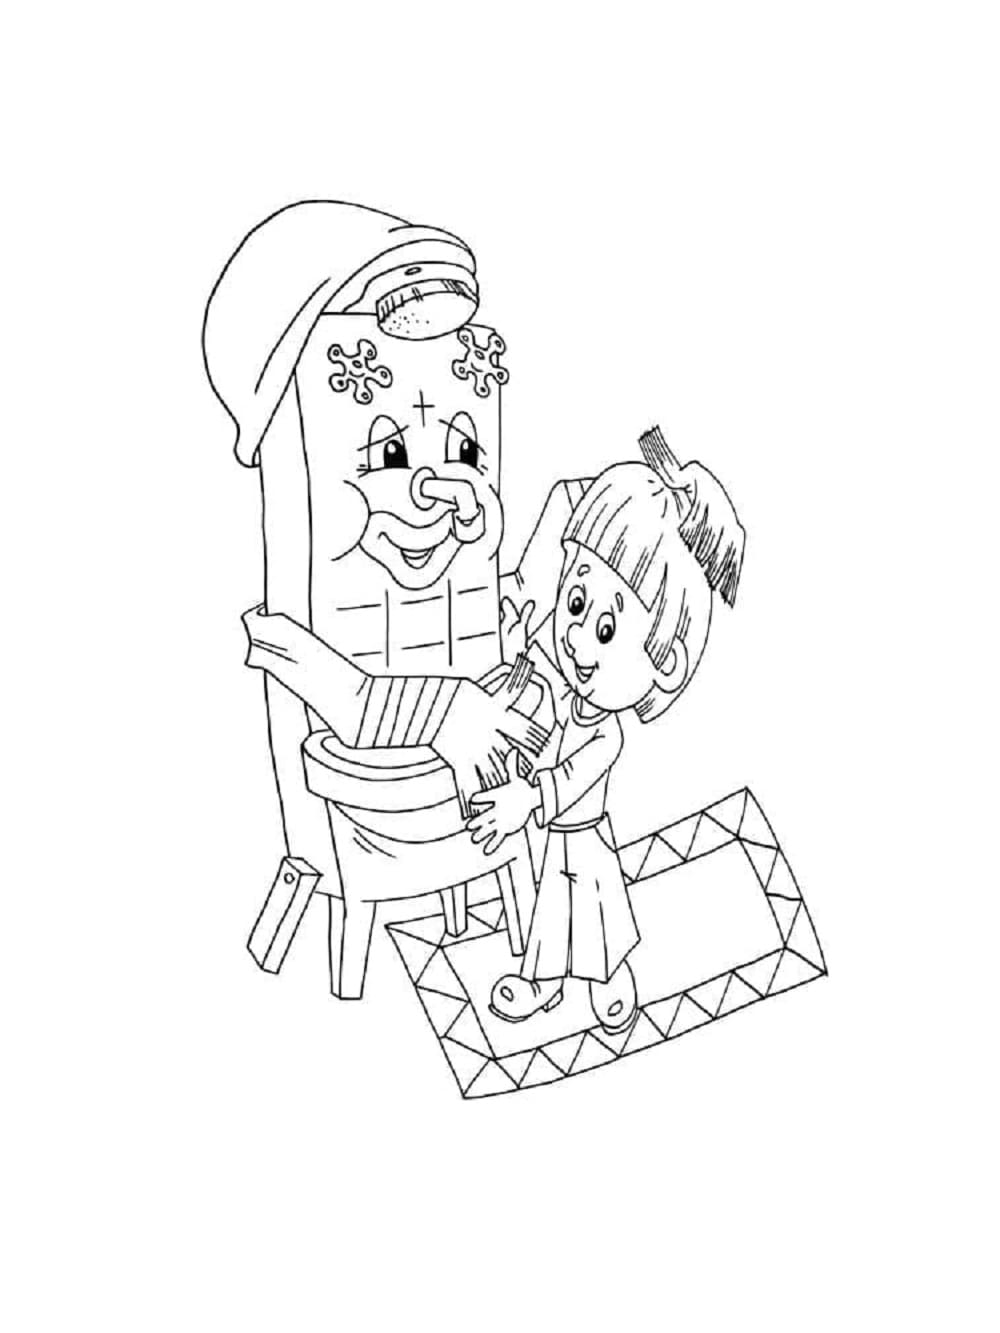 Printable Free Hygiene Coloring Page